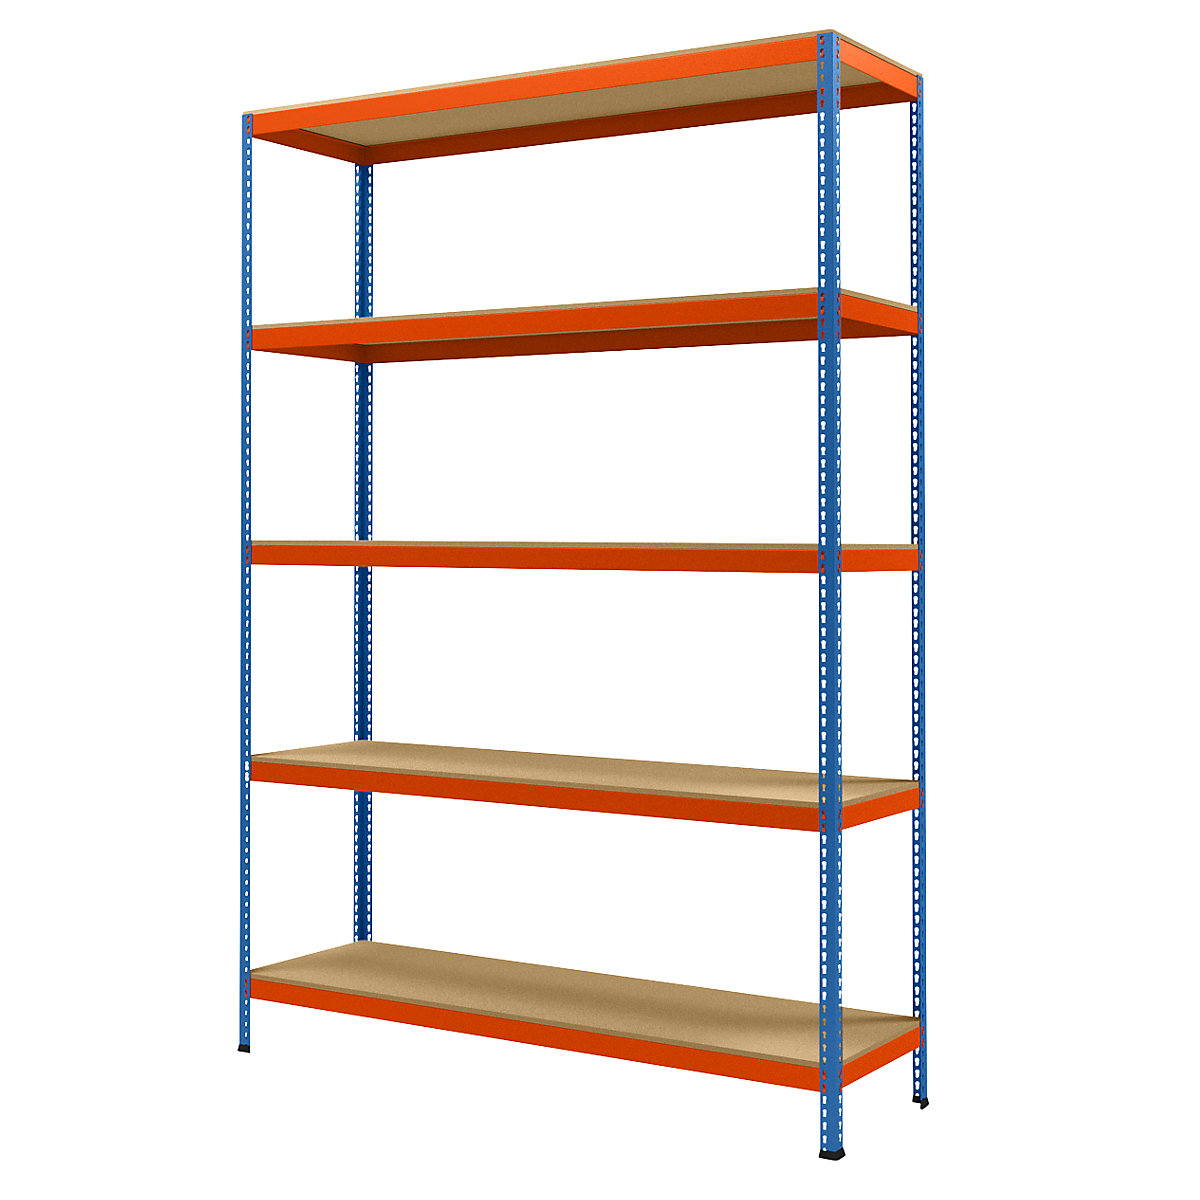 Wide span heavy duty shelving, height 3048 mm, overall depth 621 mm, width 2146 mm